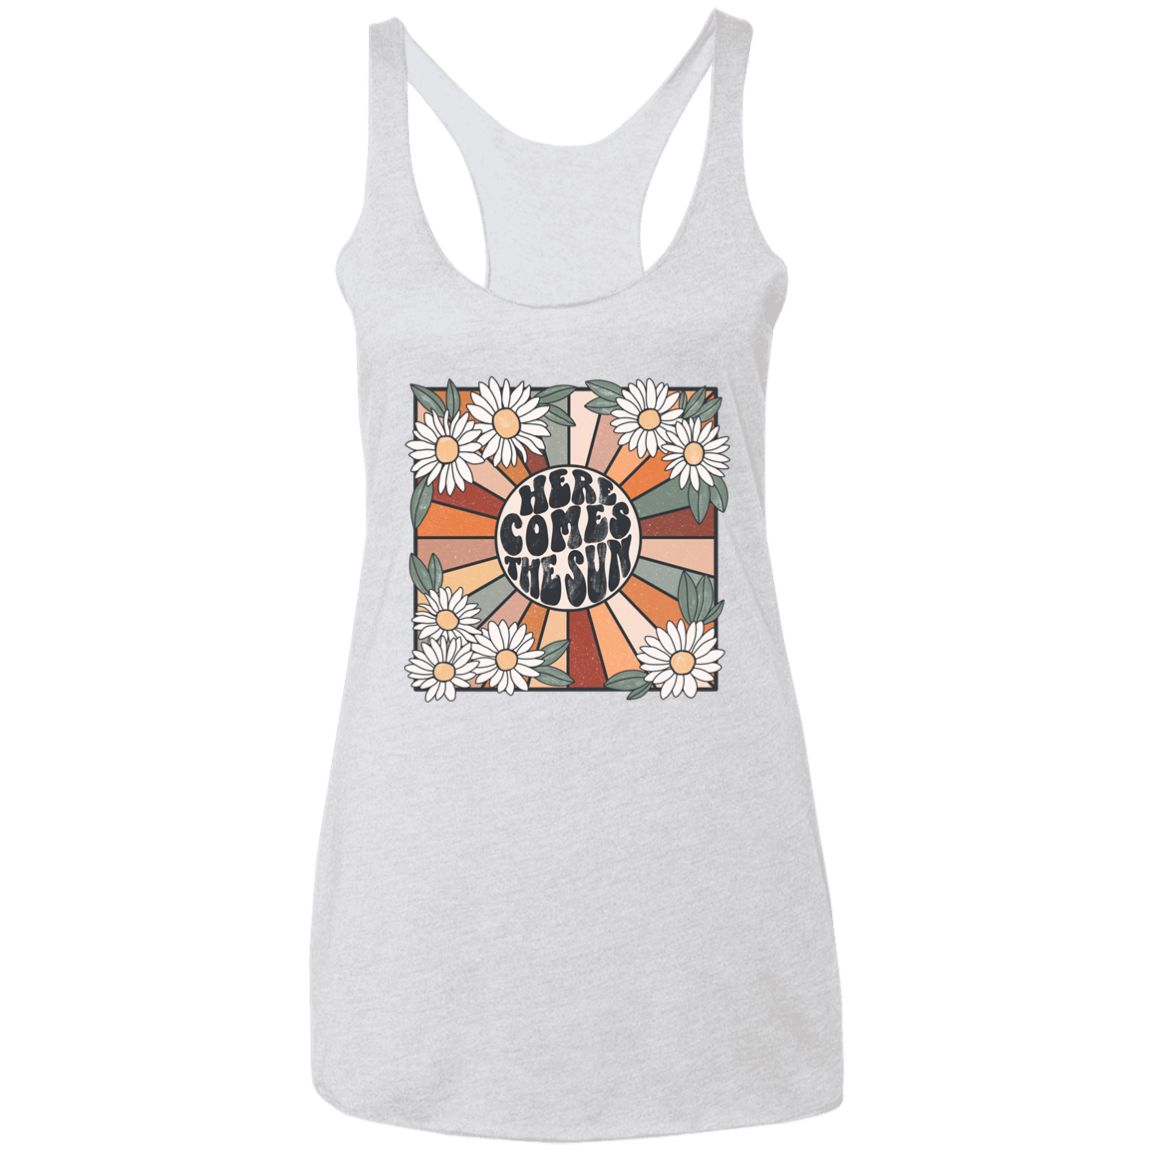 Here Comes The Sun Ladies' Triblend Racerback Tank